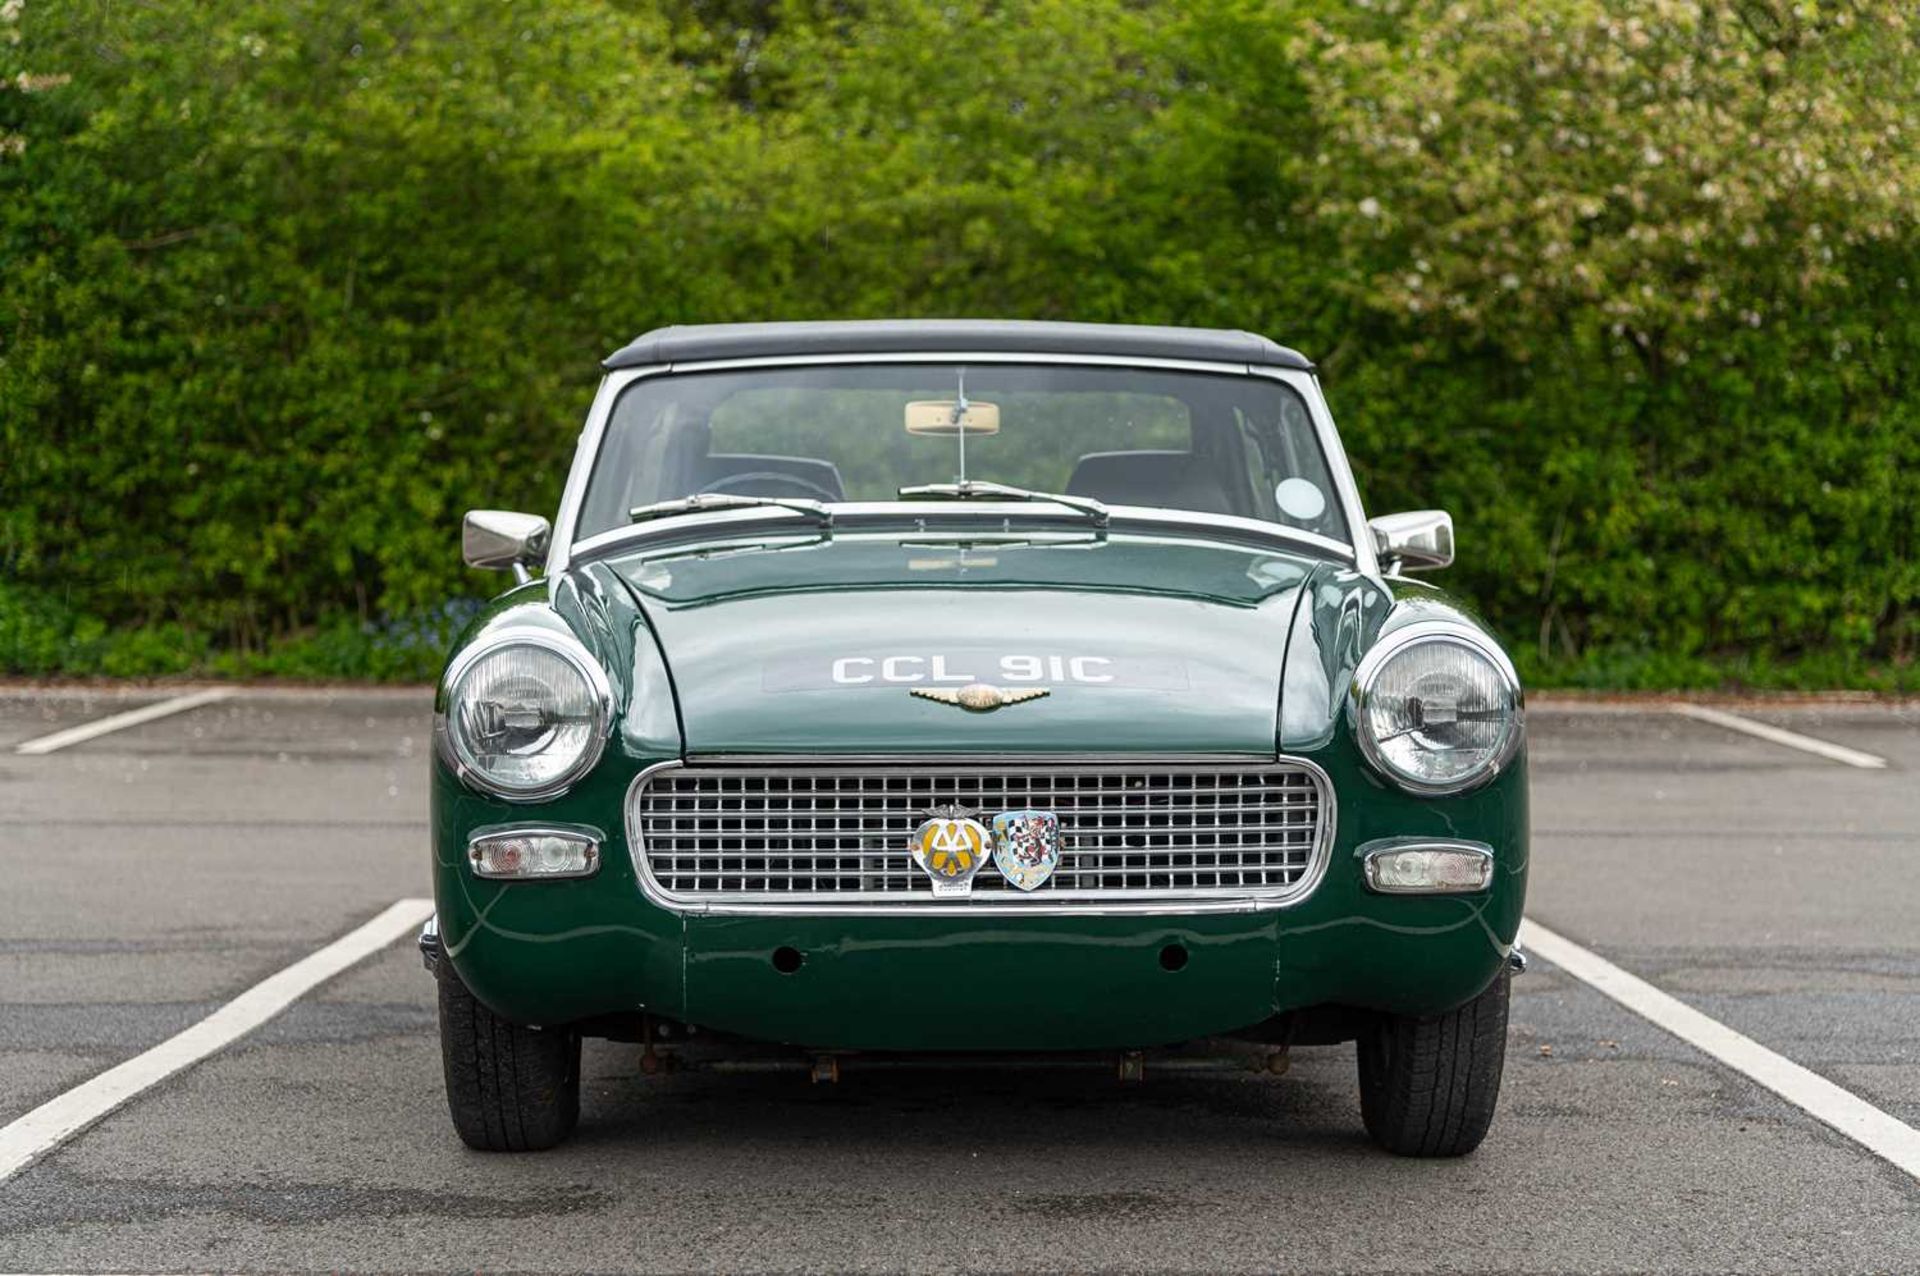 1965 Austin-Healey Sprite Formerly the property of British Formula One racing driver David Piper - Image 2 of 71